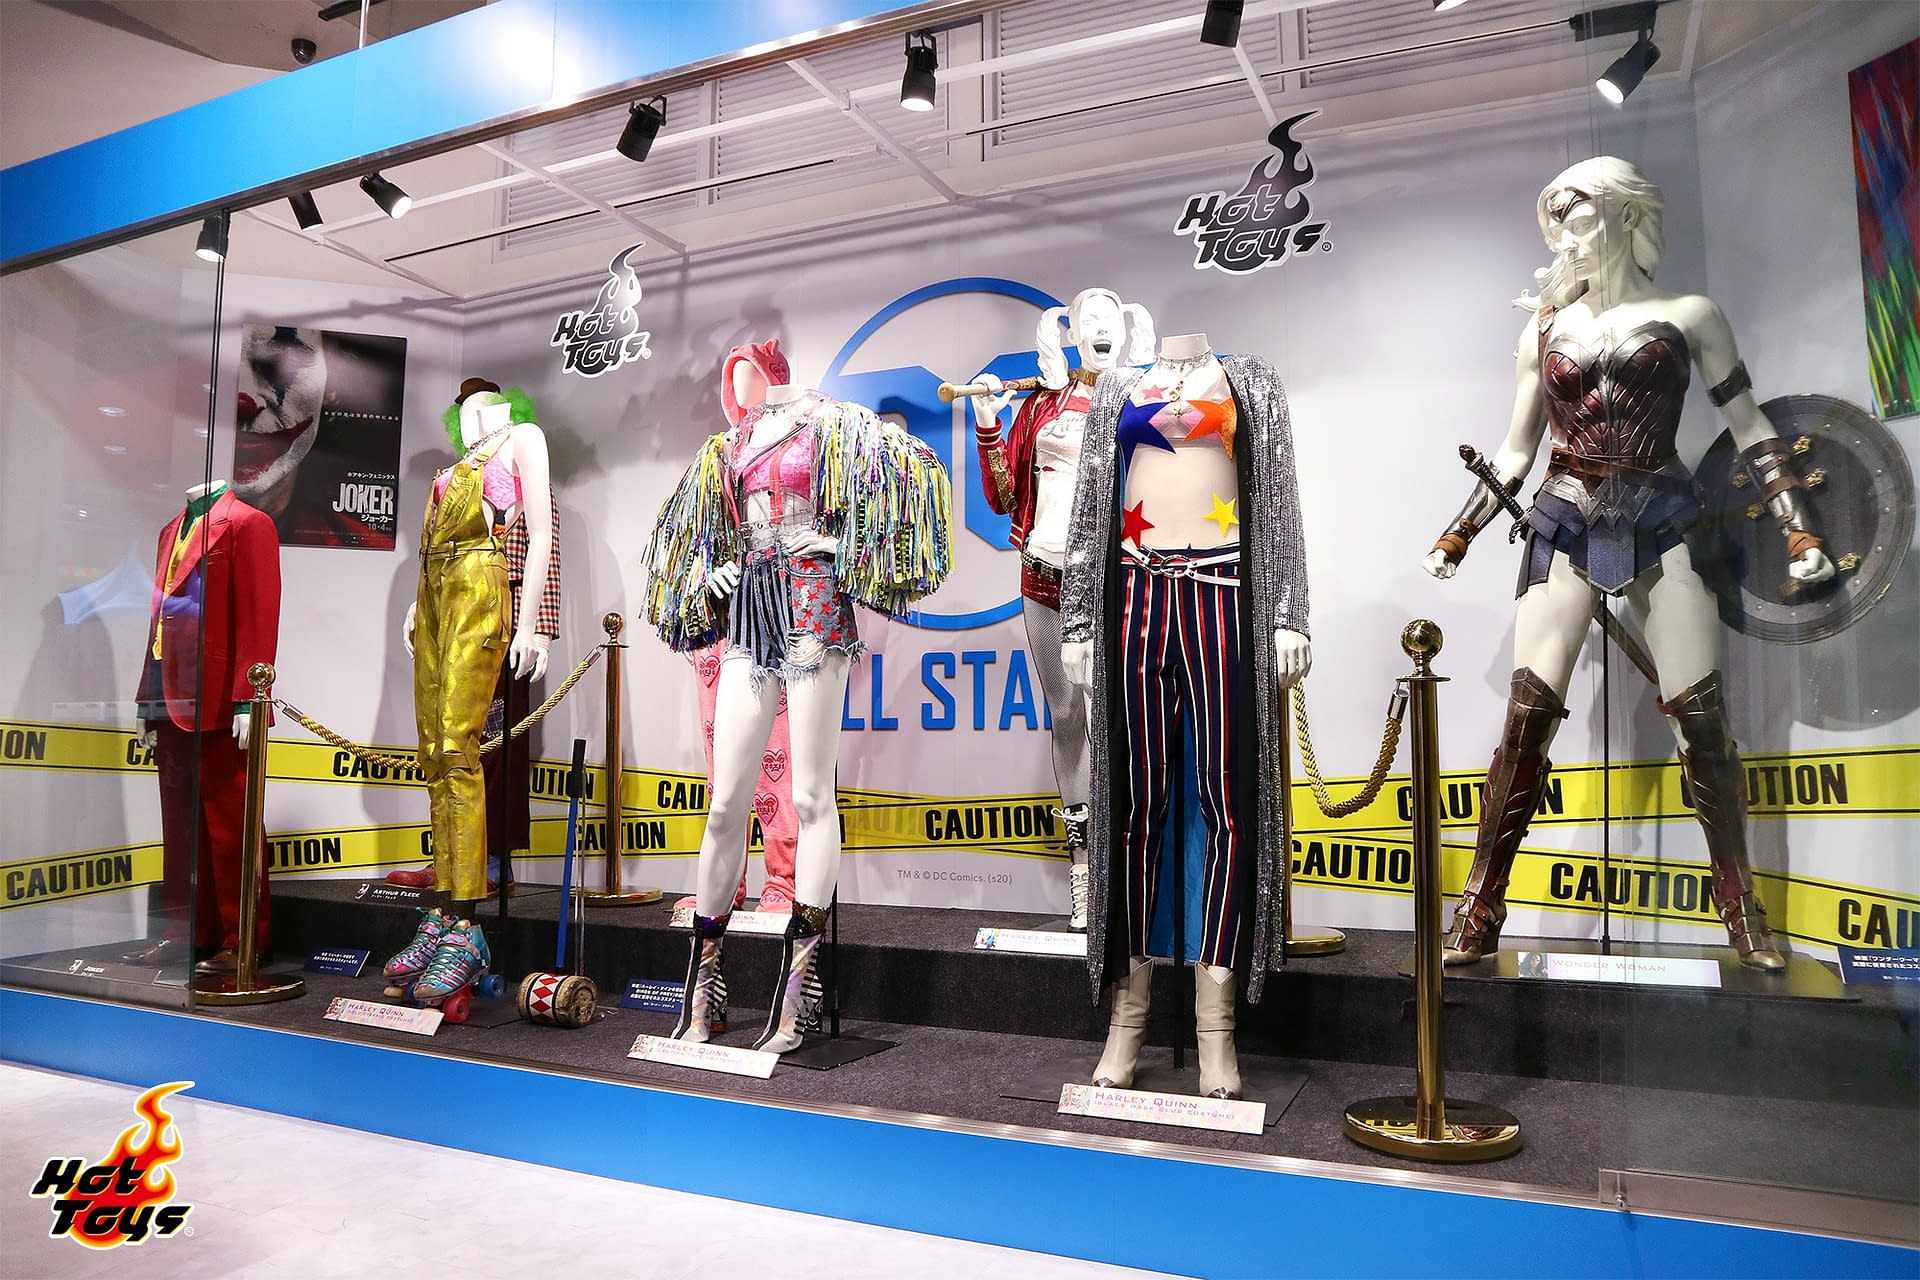 Hot Toys Shows off New Collectibles at DC All Stars Event in Tokyo 